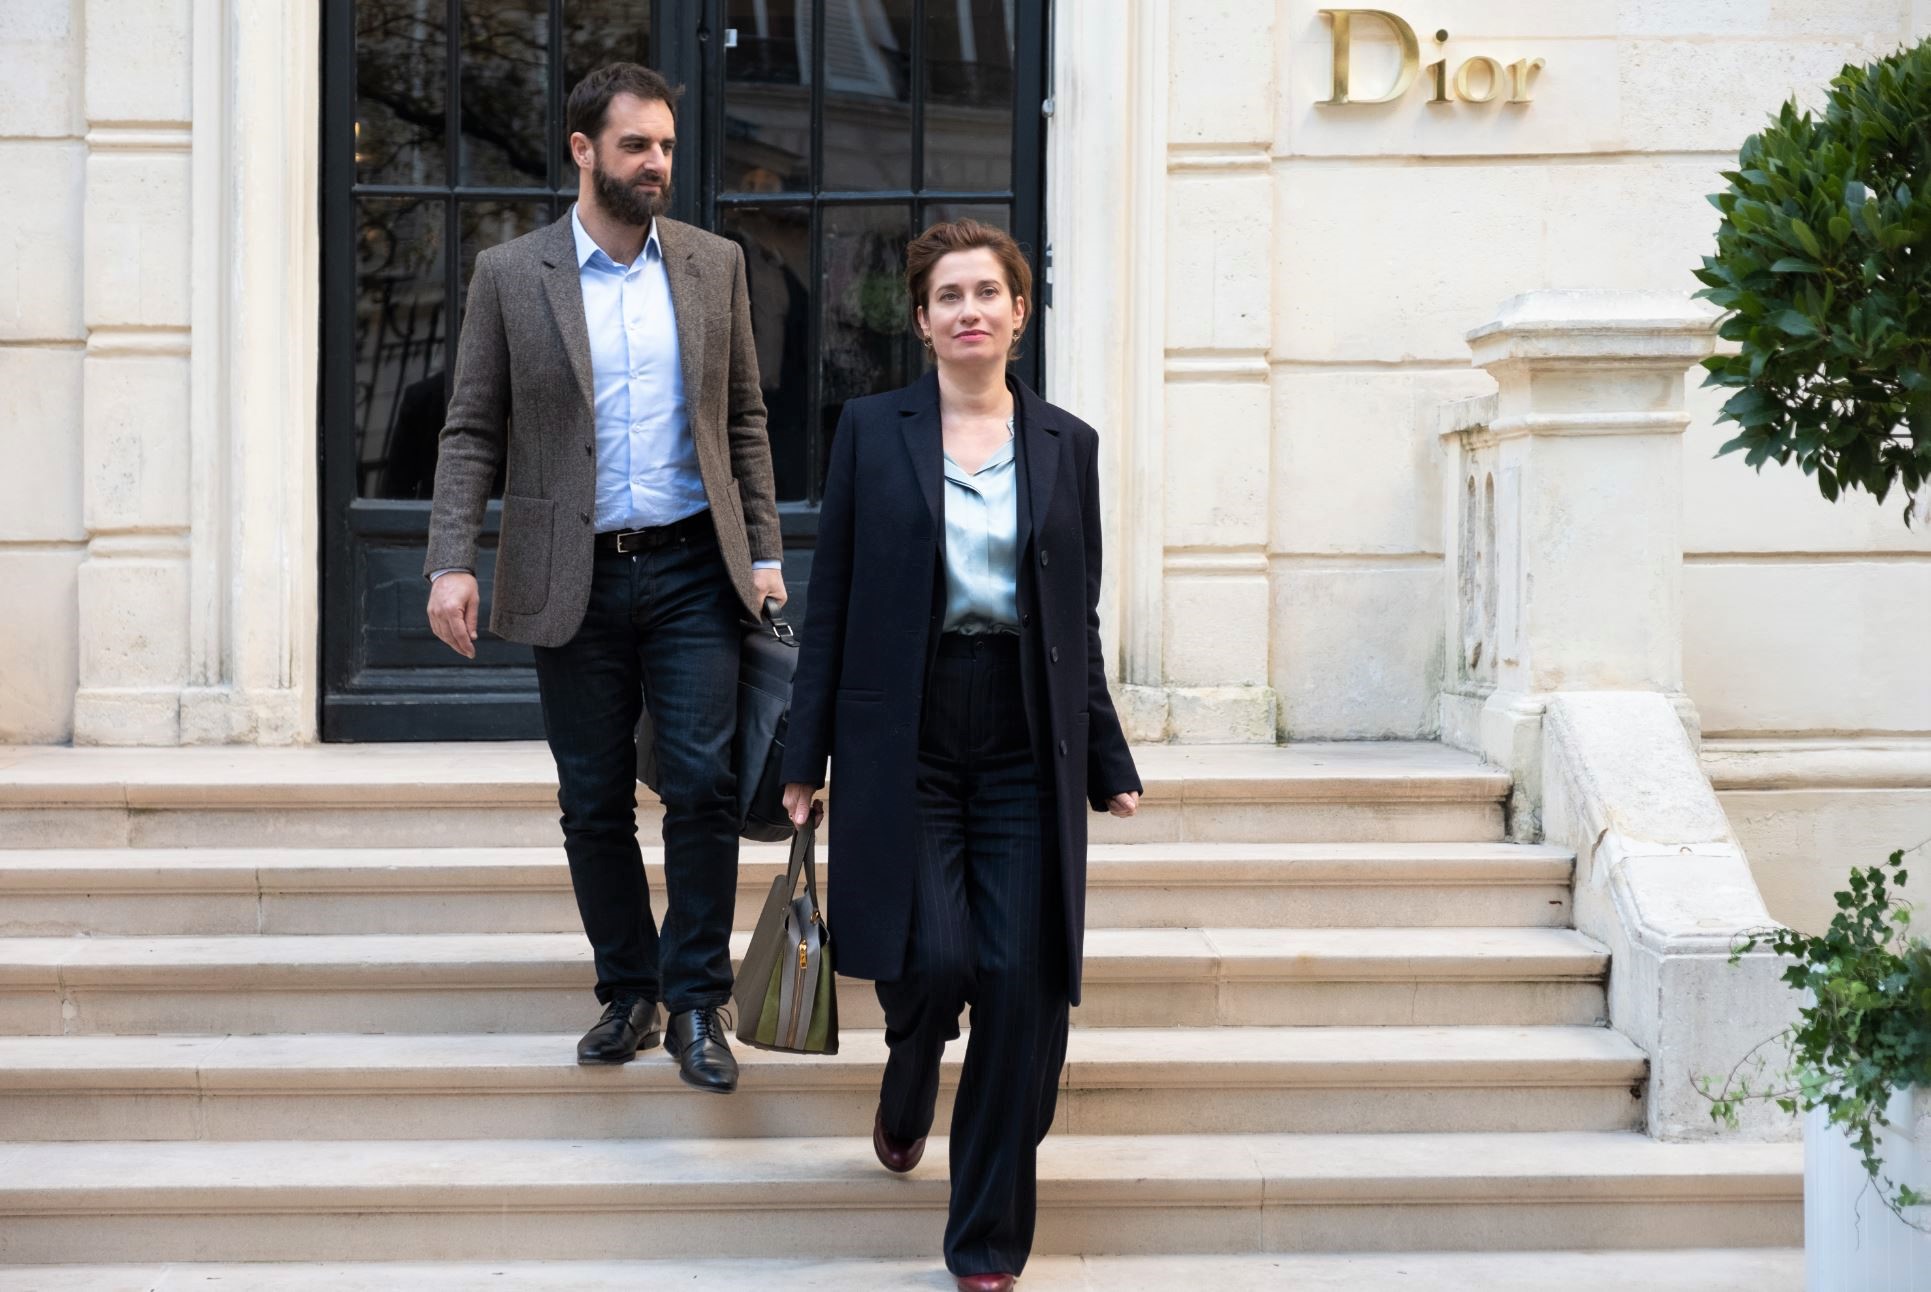 Grégory Montel and Emmanuelle Devos walk down the steps of a Dior outlet in the film Perfumes.